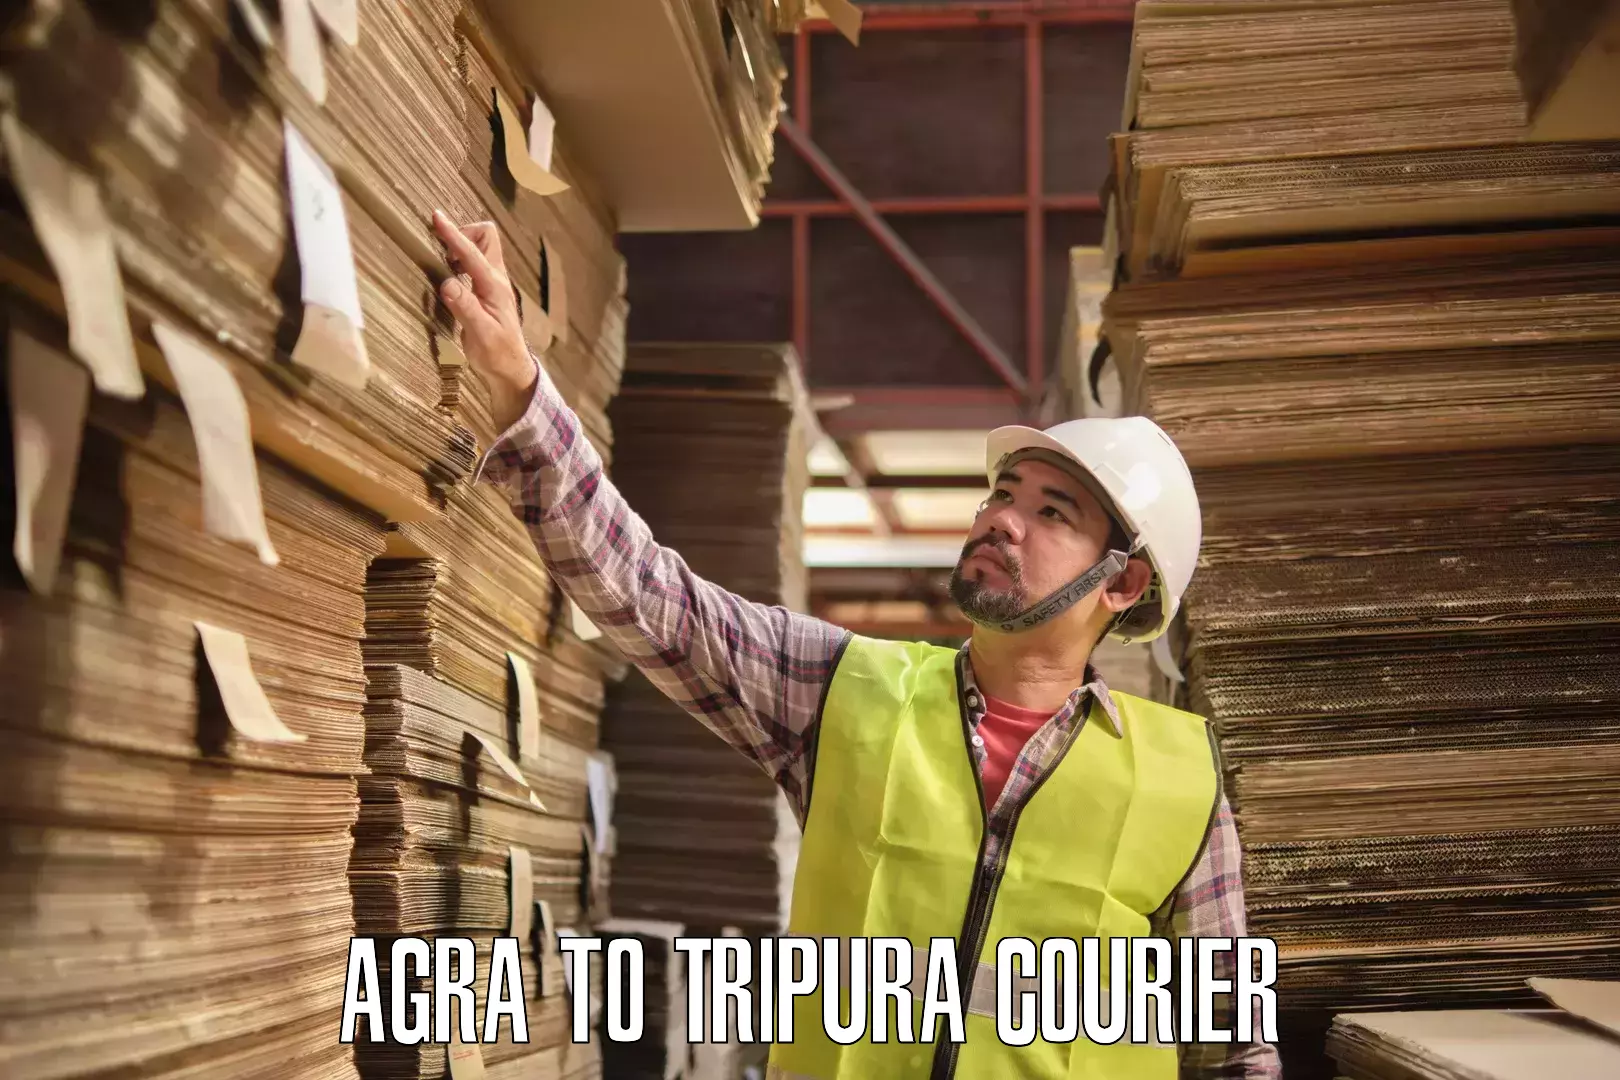 Courier service booking Agra to Tripura